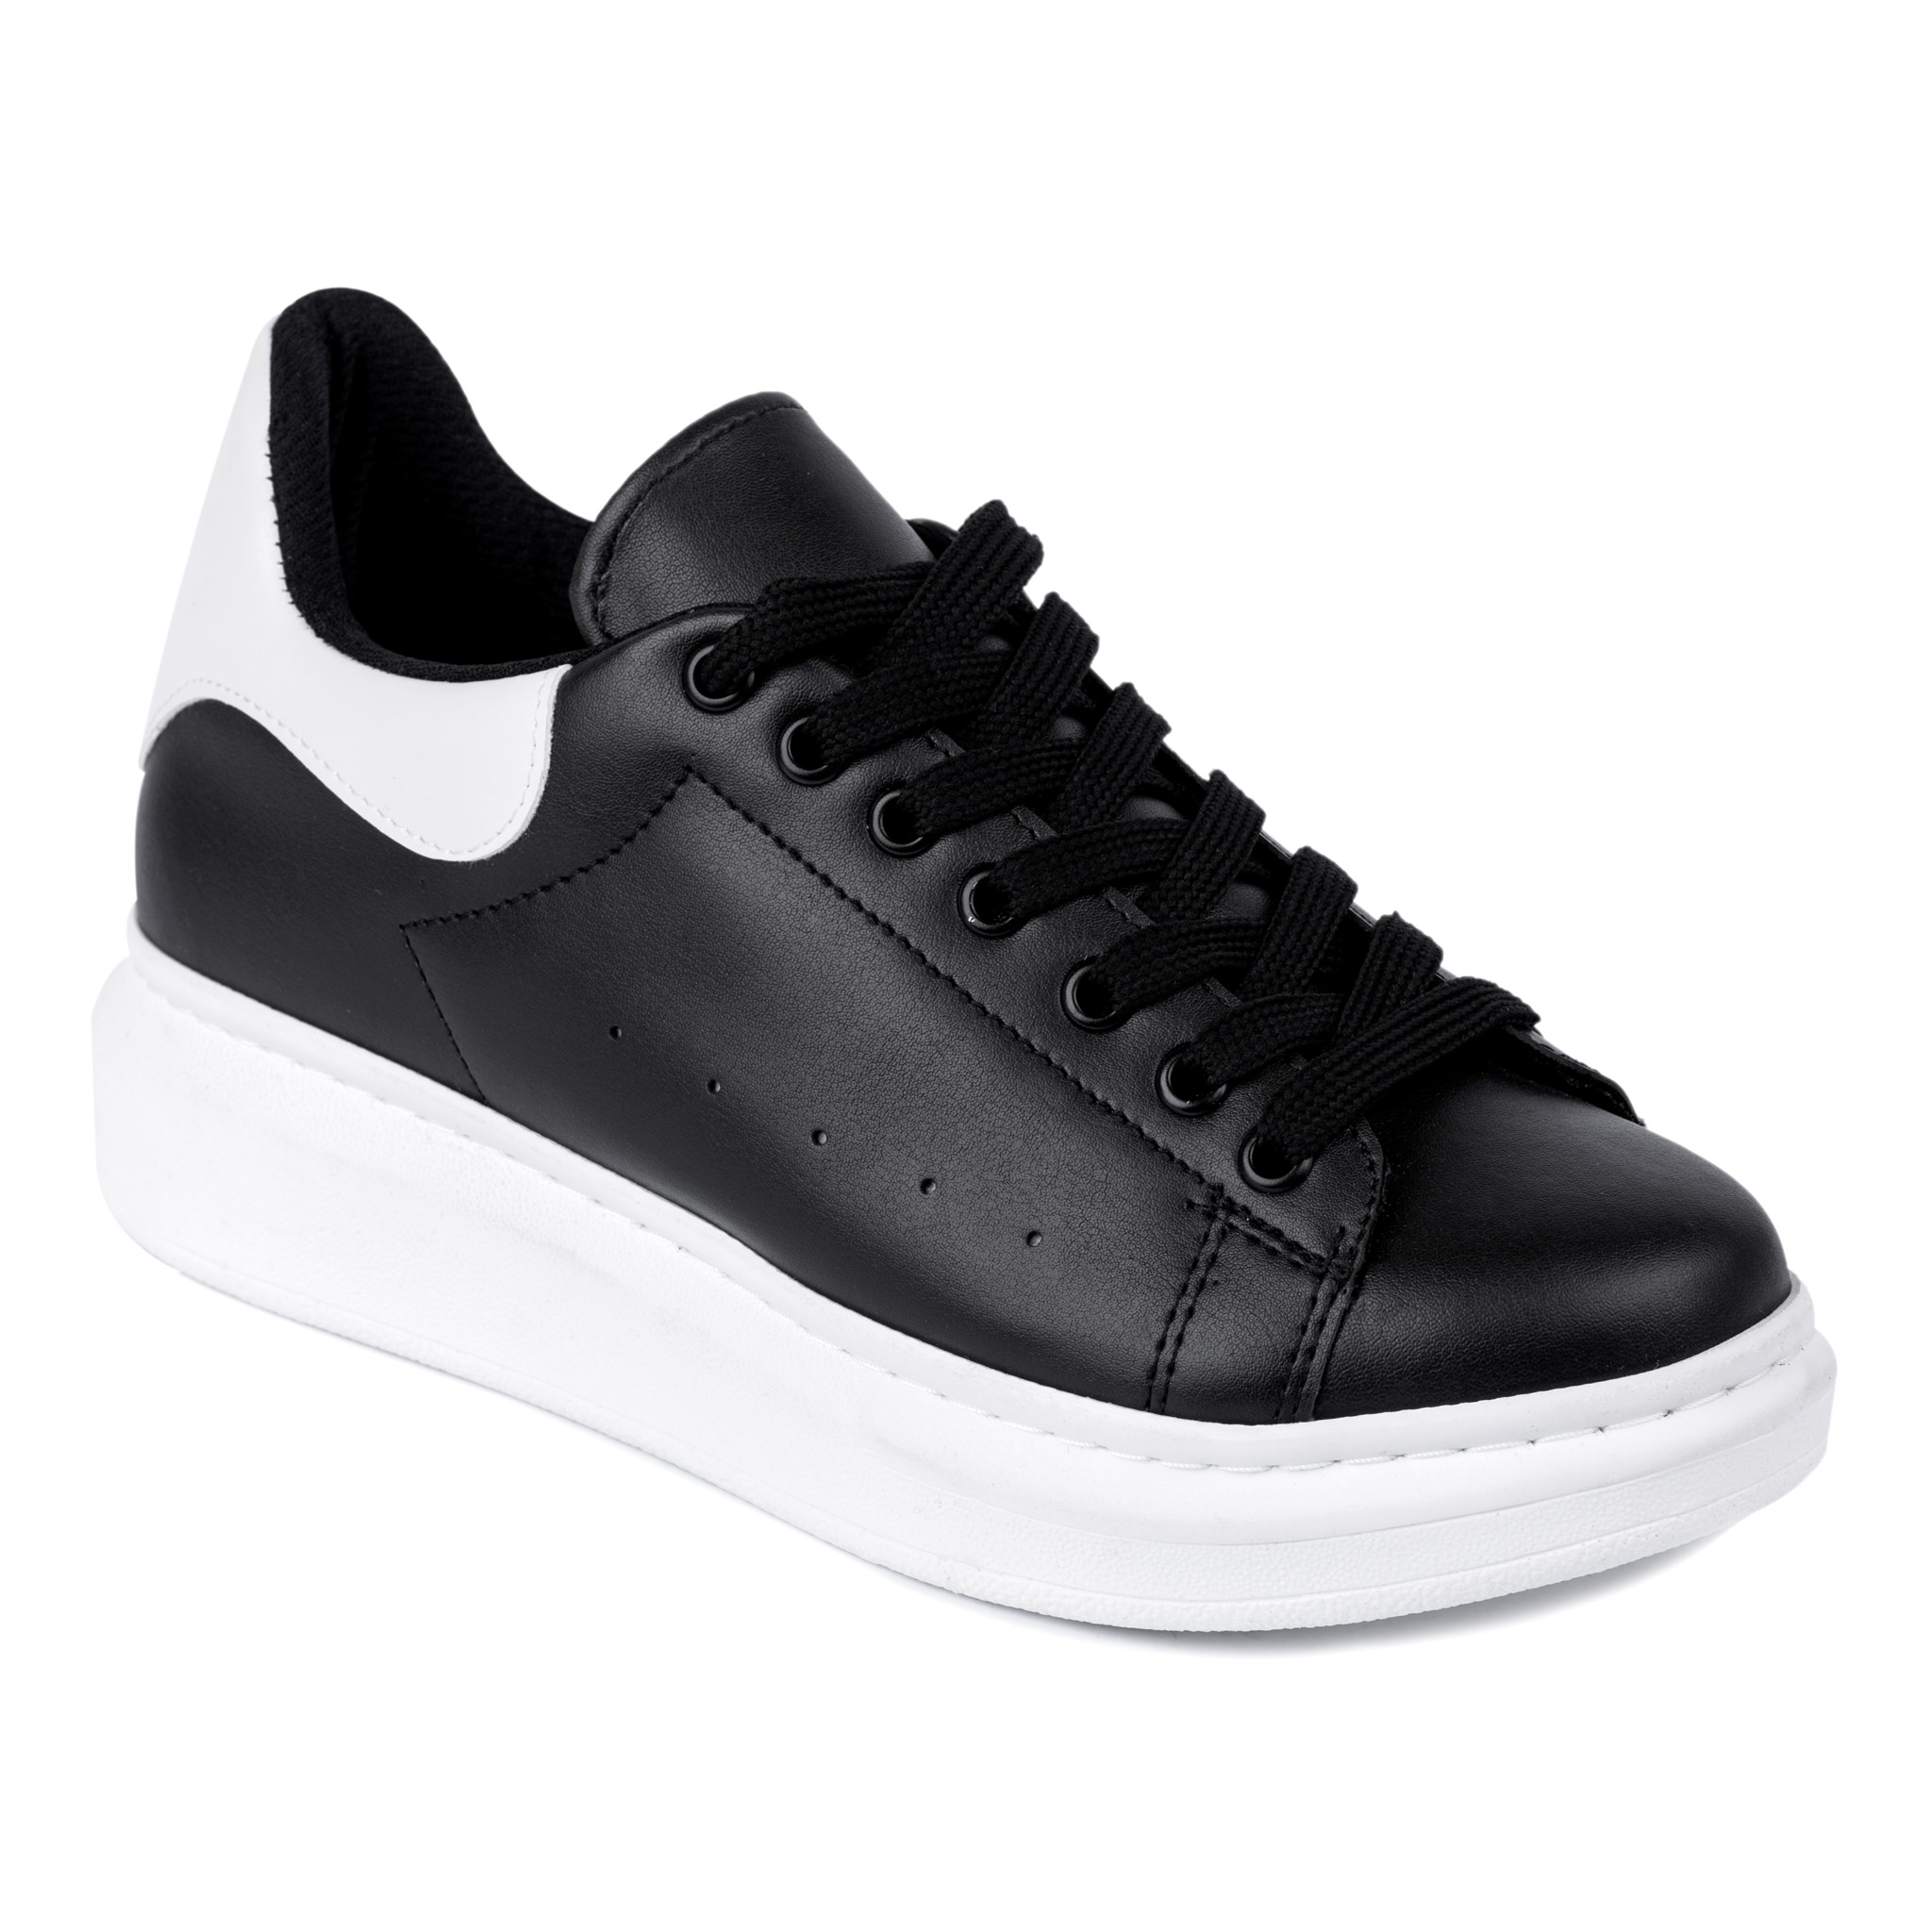 HIGH SOLE SNEAKERS - BLACK/WHITE